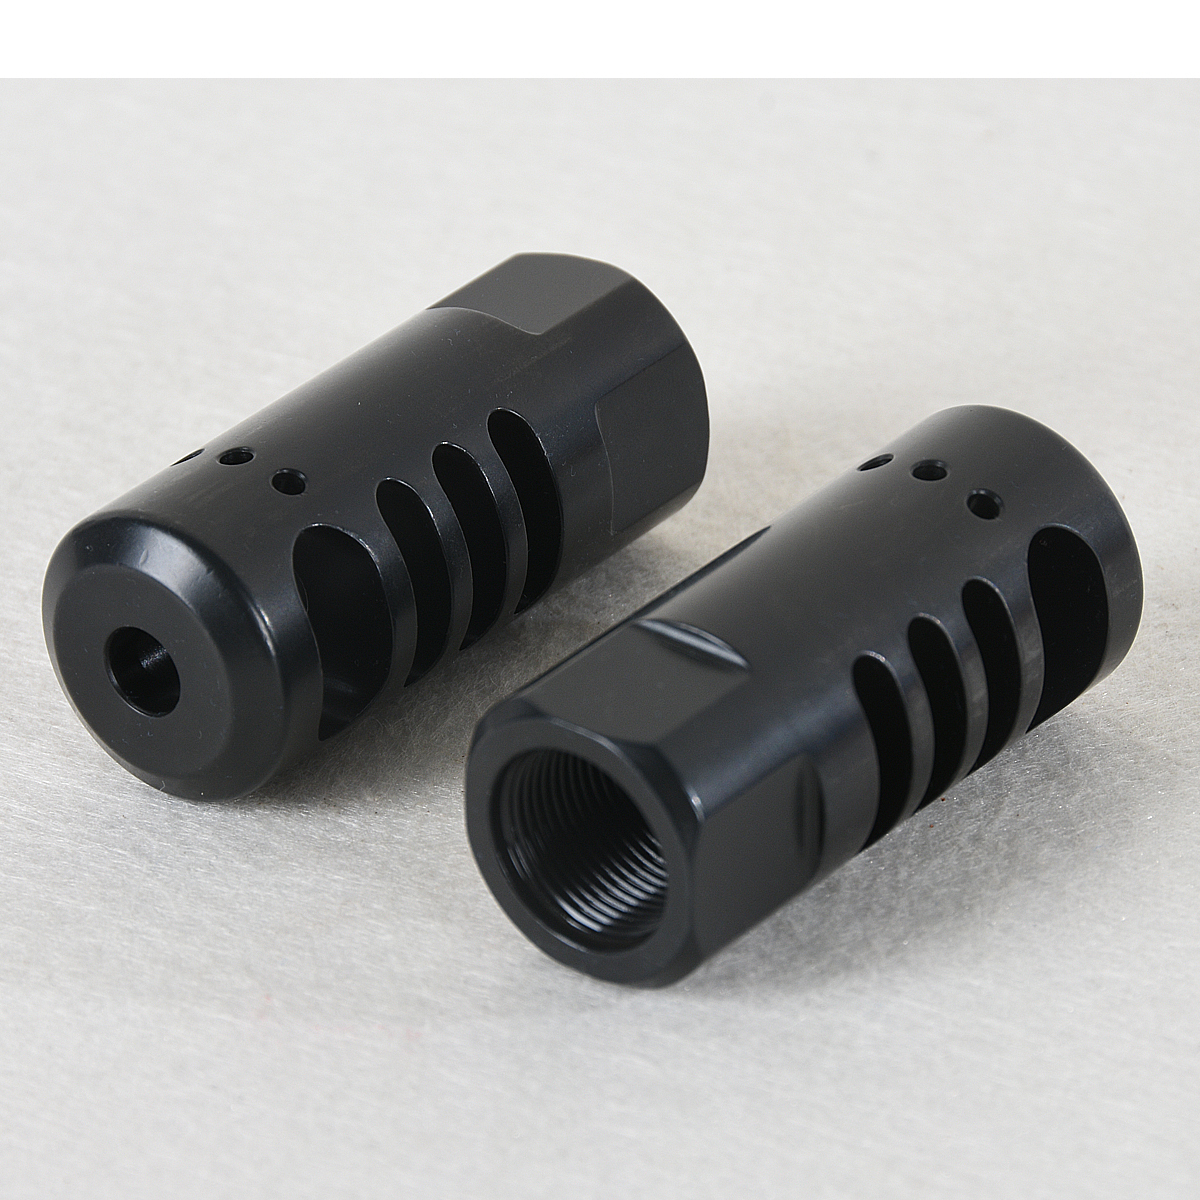 Simple but effective, the HPS Pepperpot Muzzle Brake has been manufactured ...